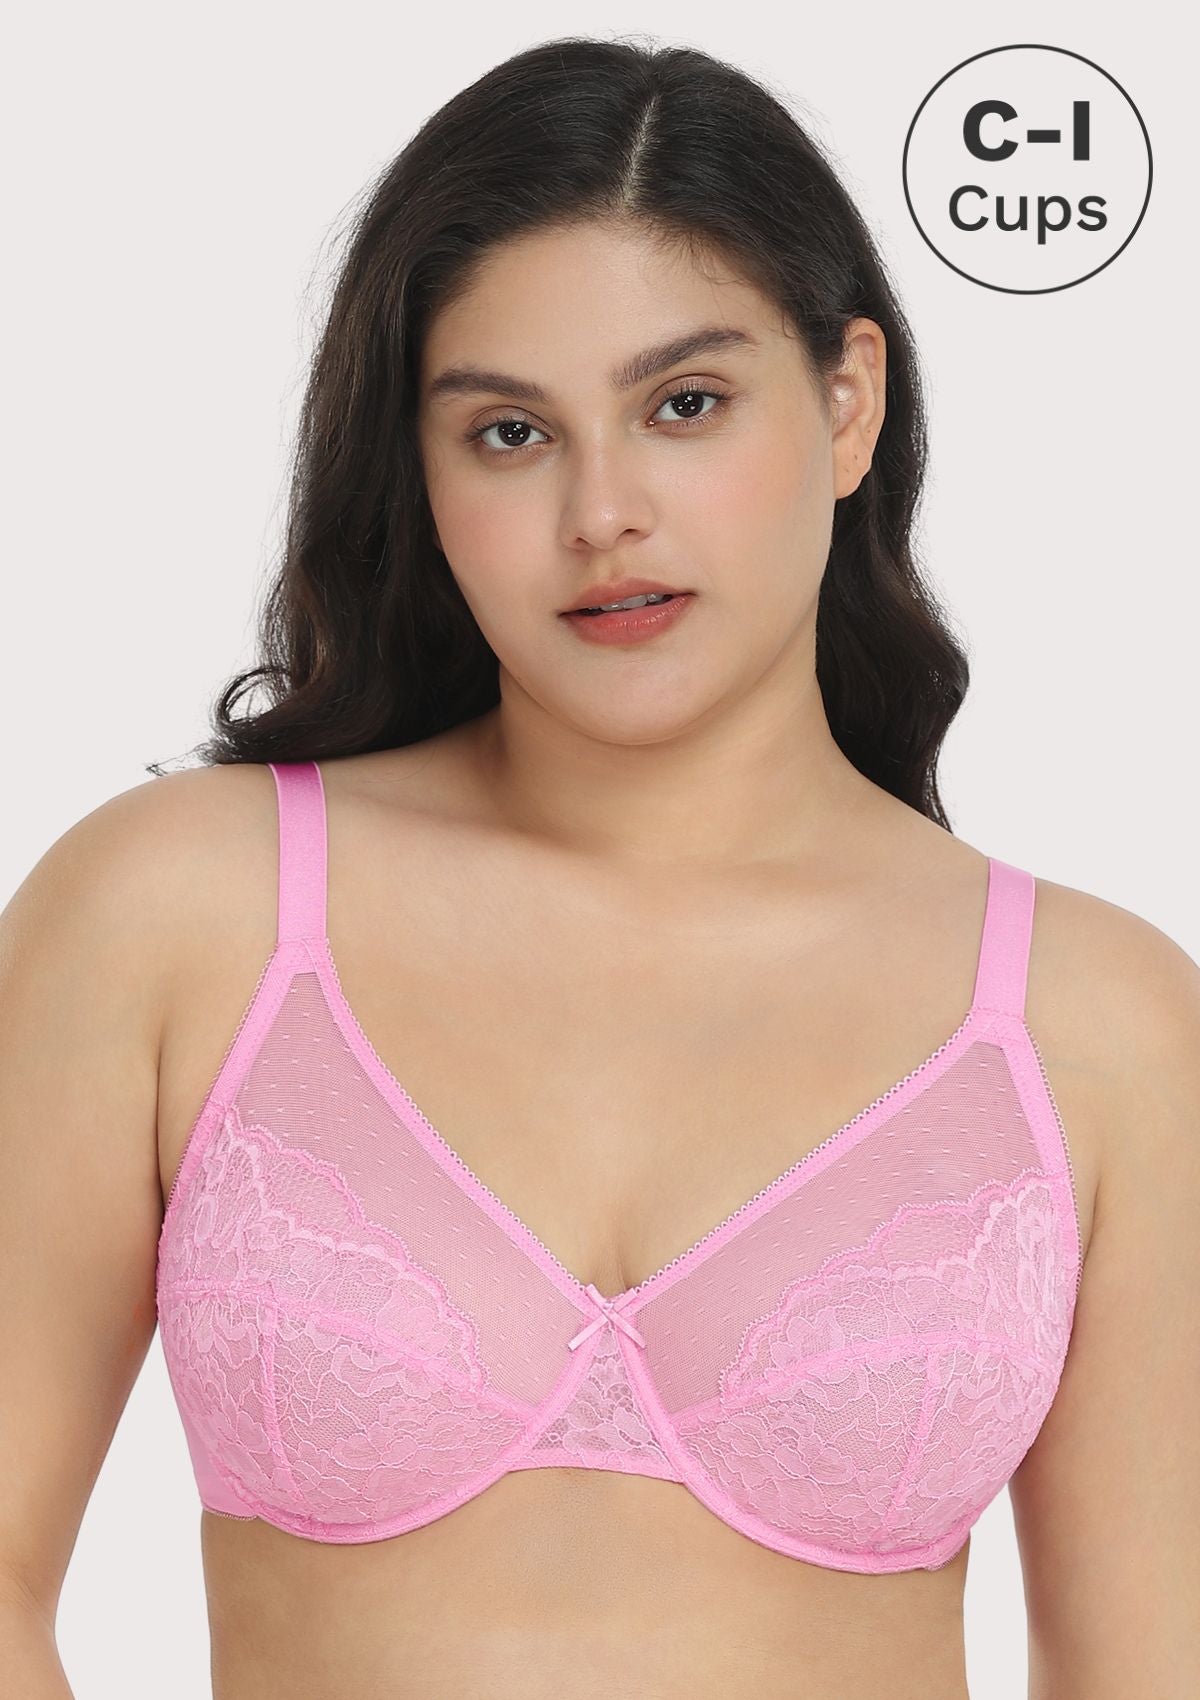 HSIA Enchante Lacy Bra: Comfy Sheer Lace Bra With Lift - Dusty Peach / 44 / G